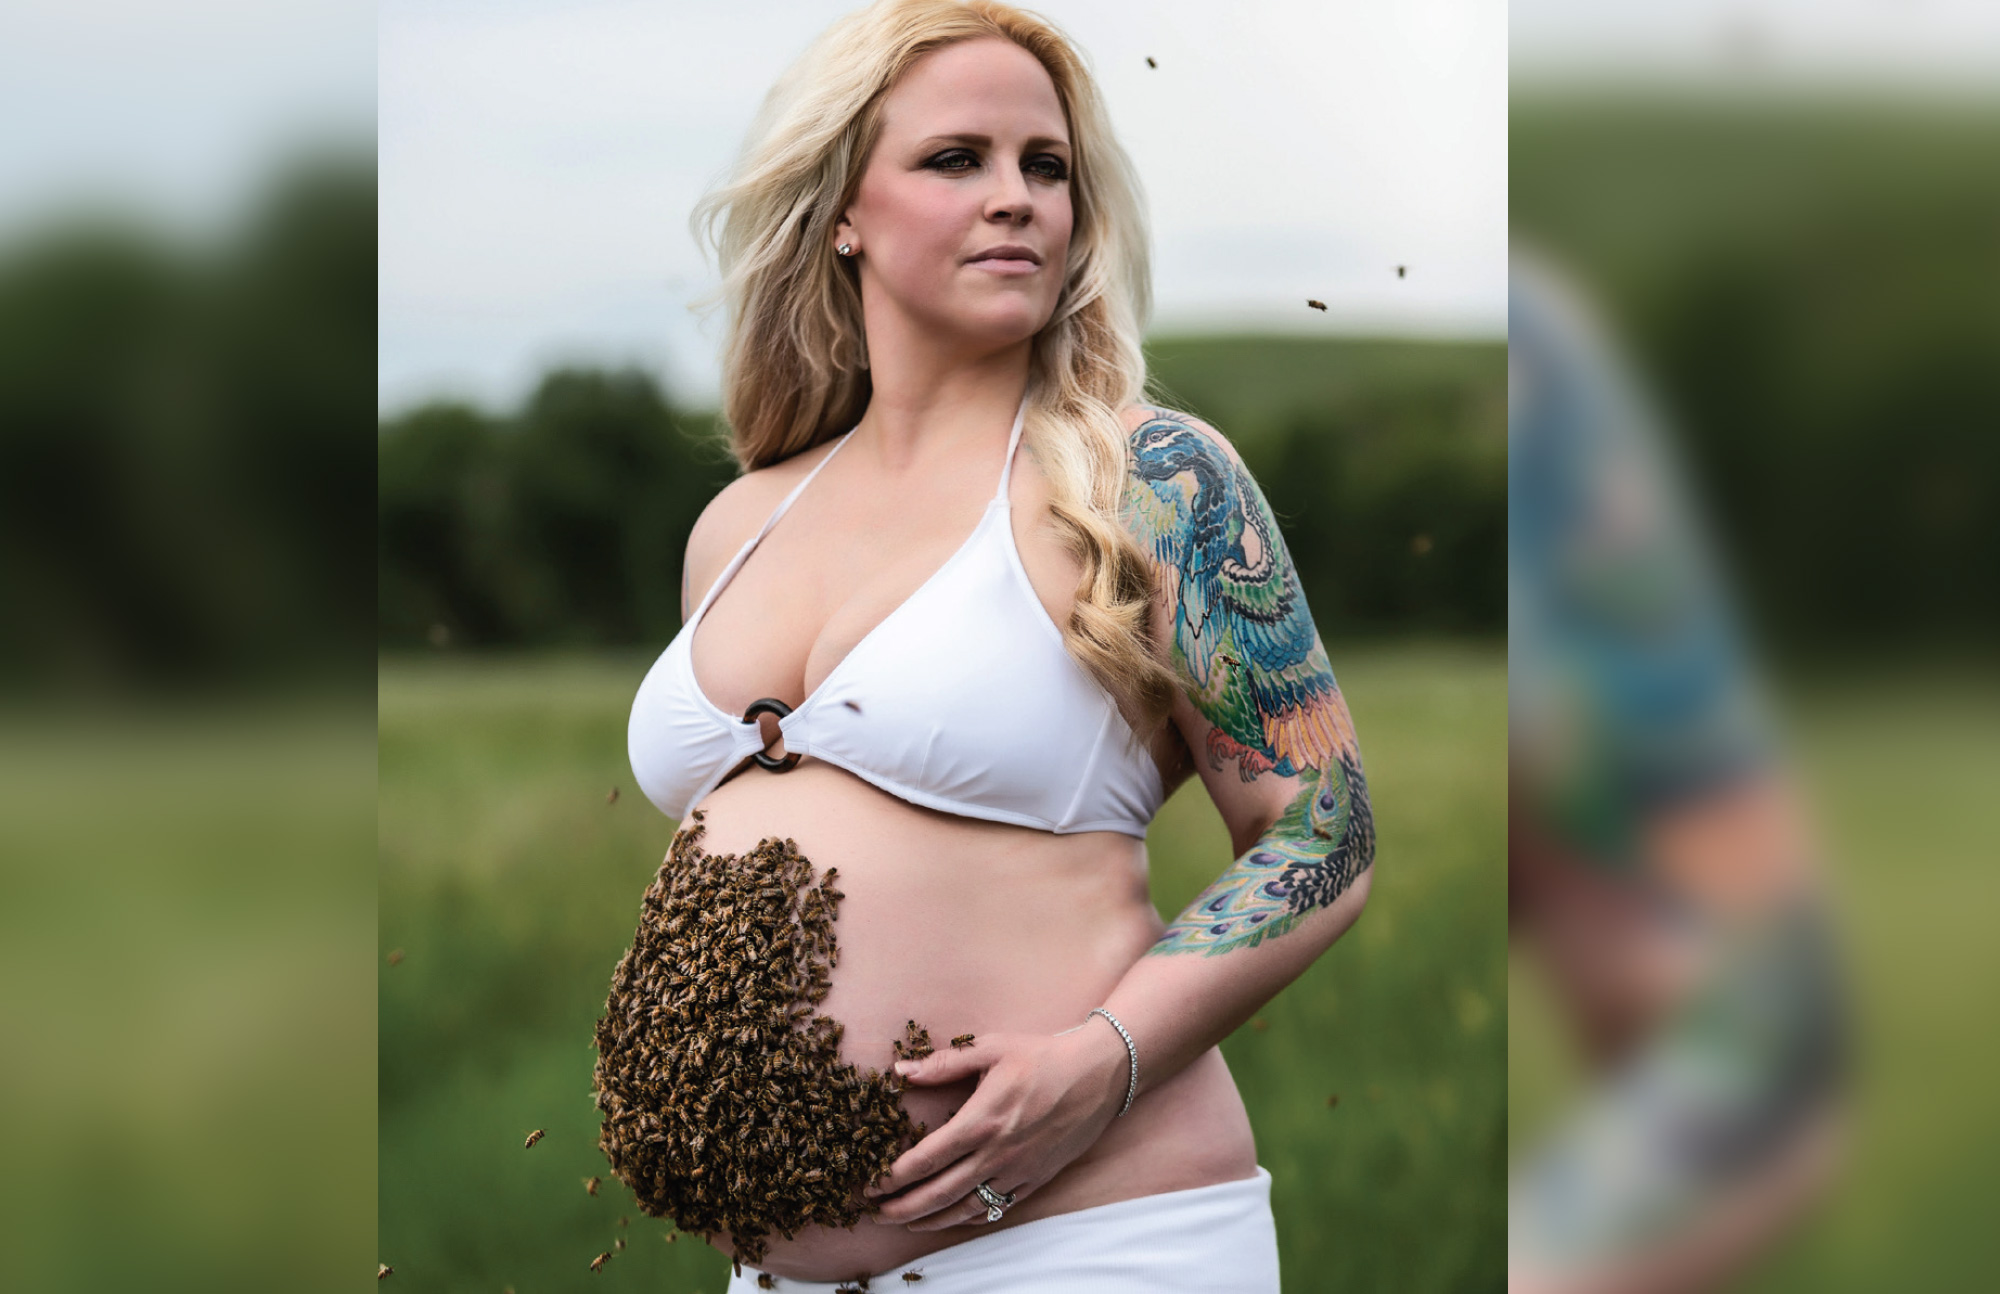 photo by Brooke Welch | Bethany Baker poses with her bees in Hayden. Bethany is the wife of Perry Baker, formerly of Granby, and an owner at Outlaw Apiaries.